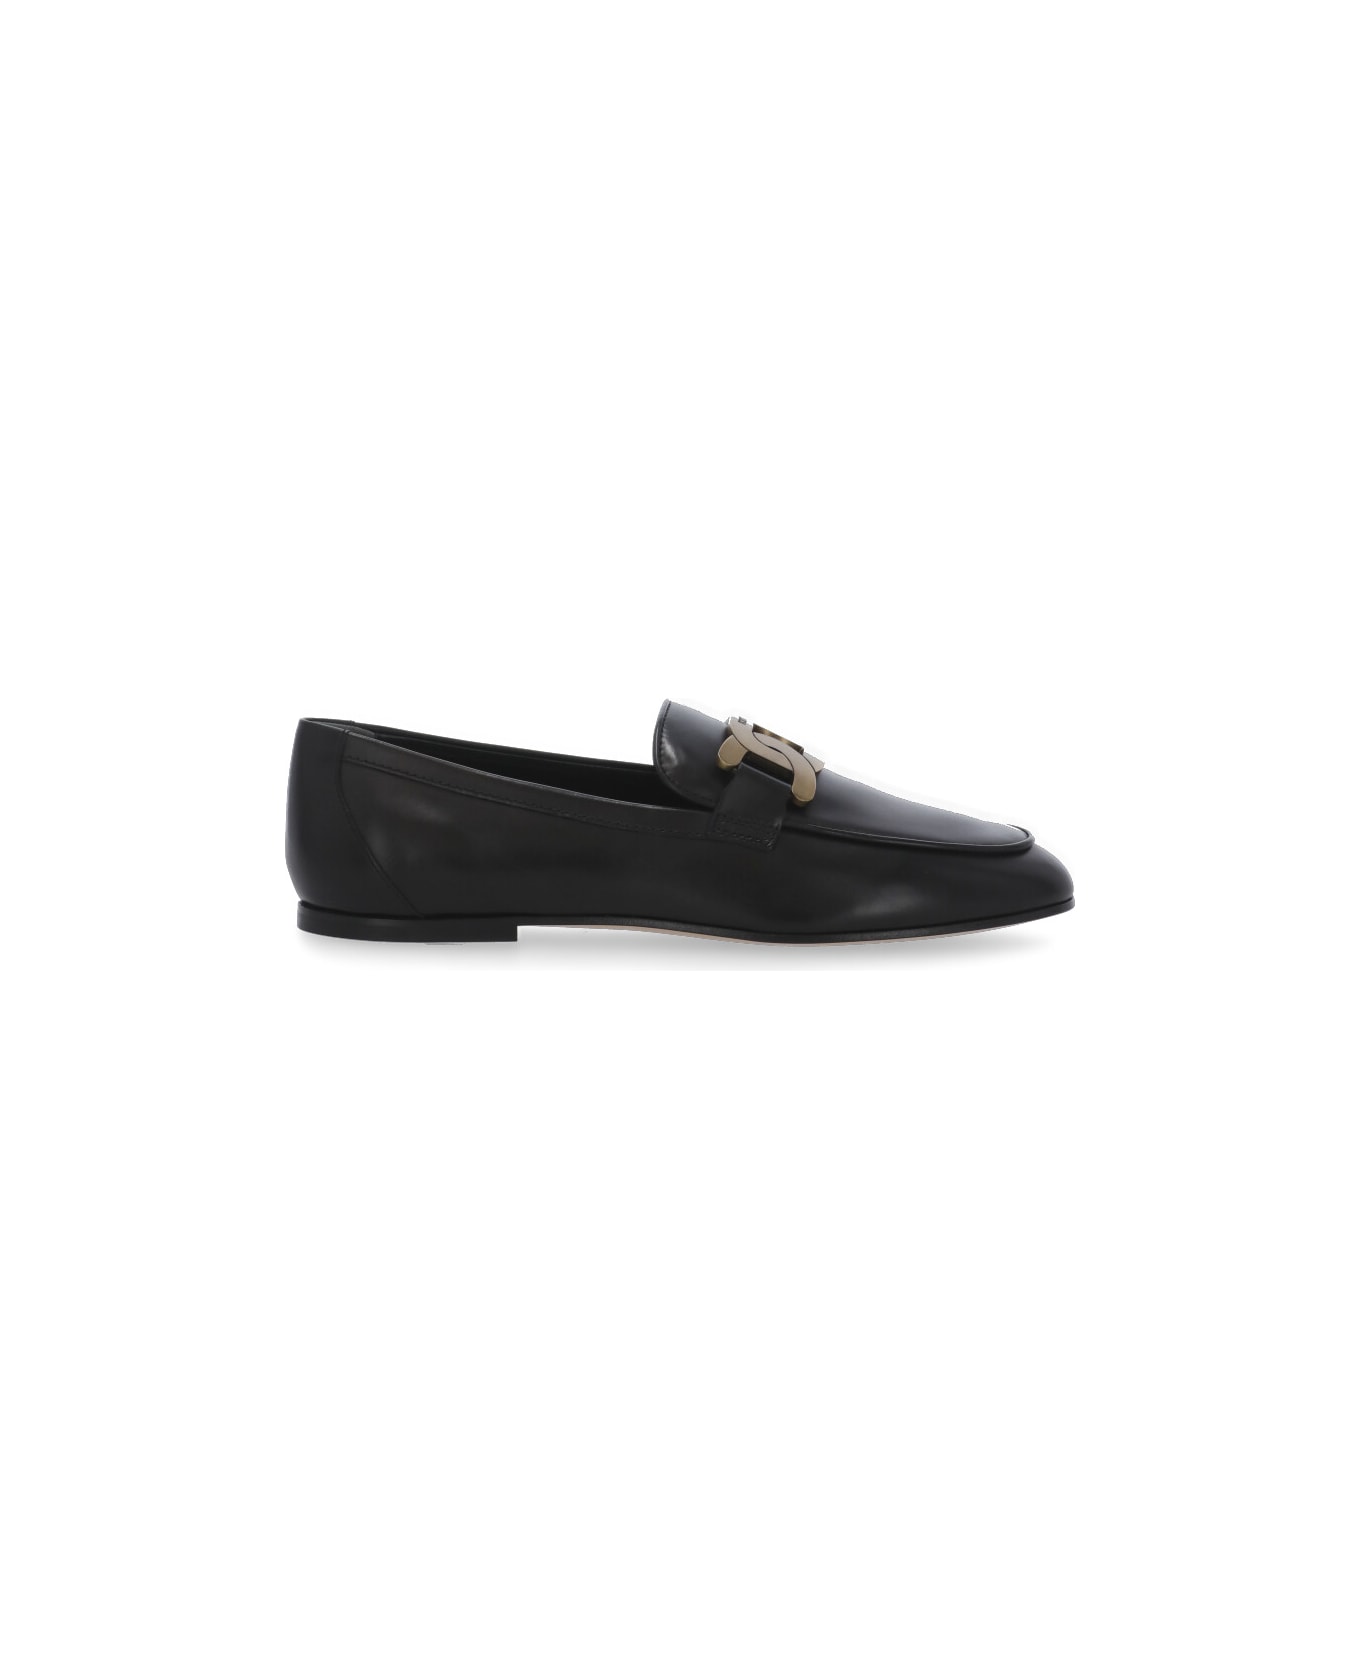 Tod's 'kate' Leather Loafer - Nero フラットシューズ